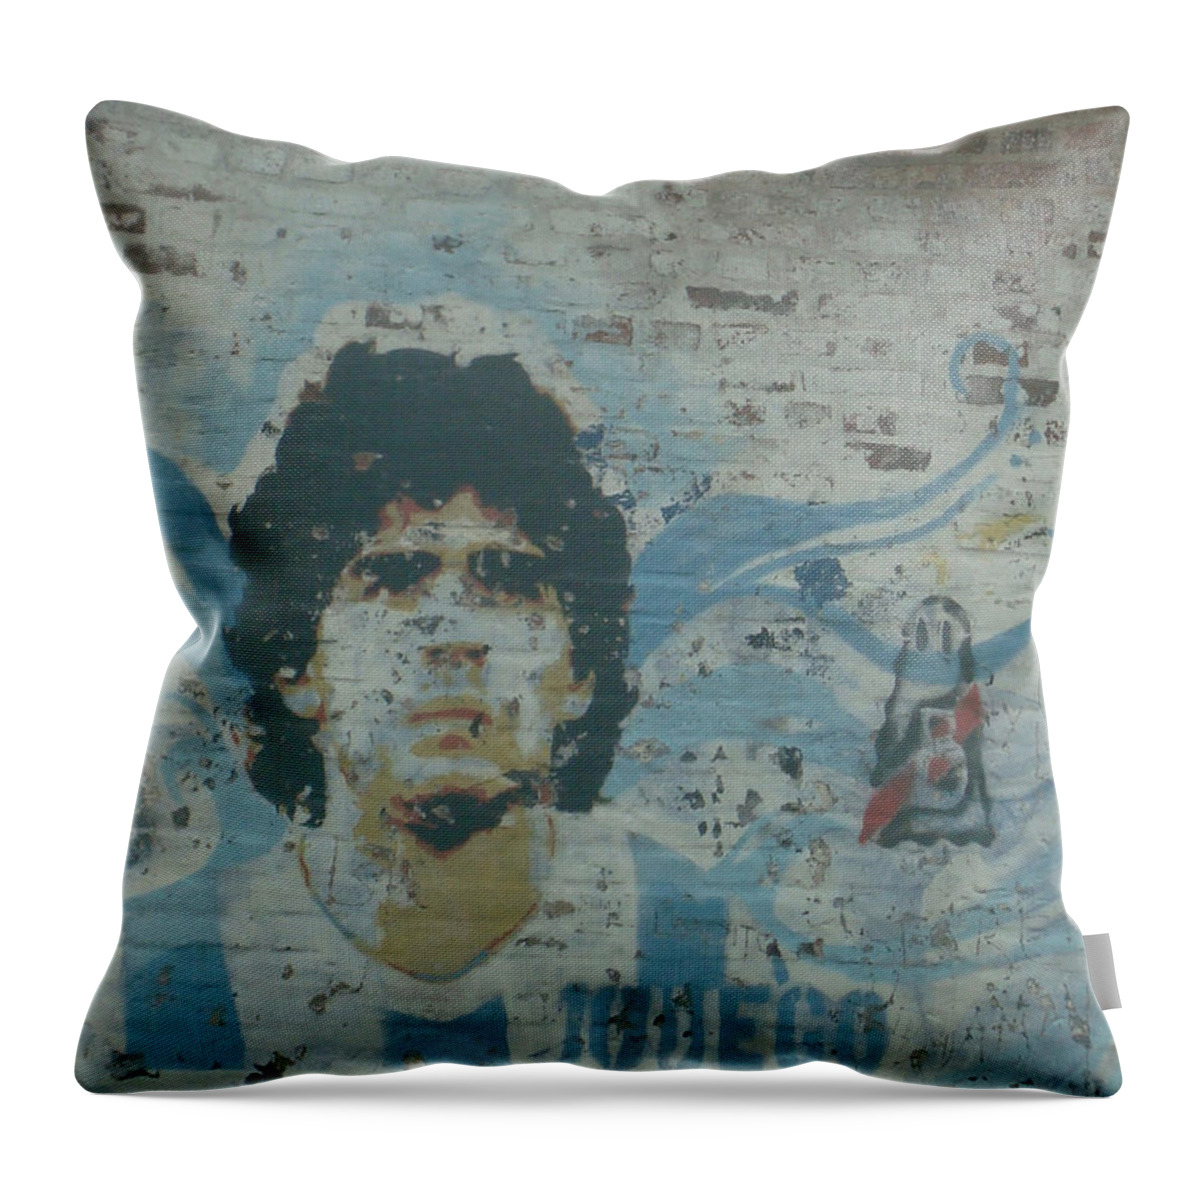 La Boca Throw Pillow featuring the photograph Diego by David Rucker